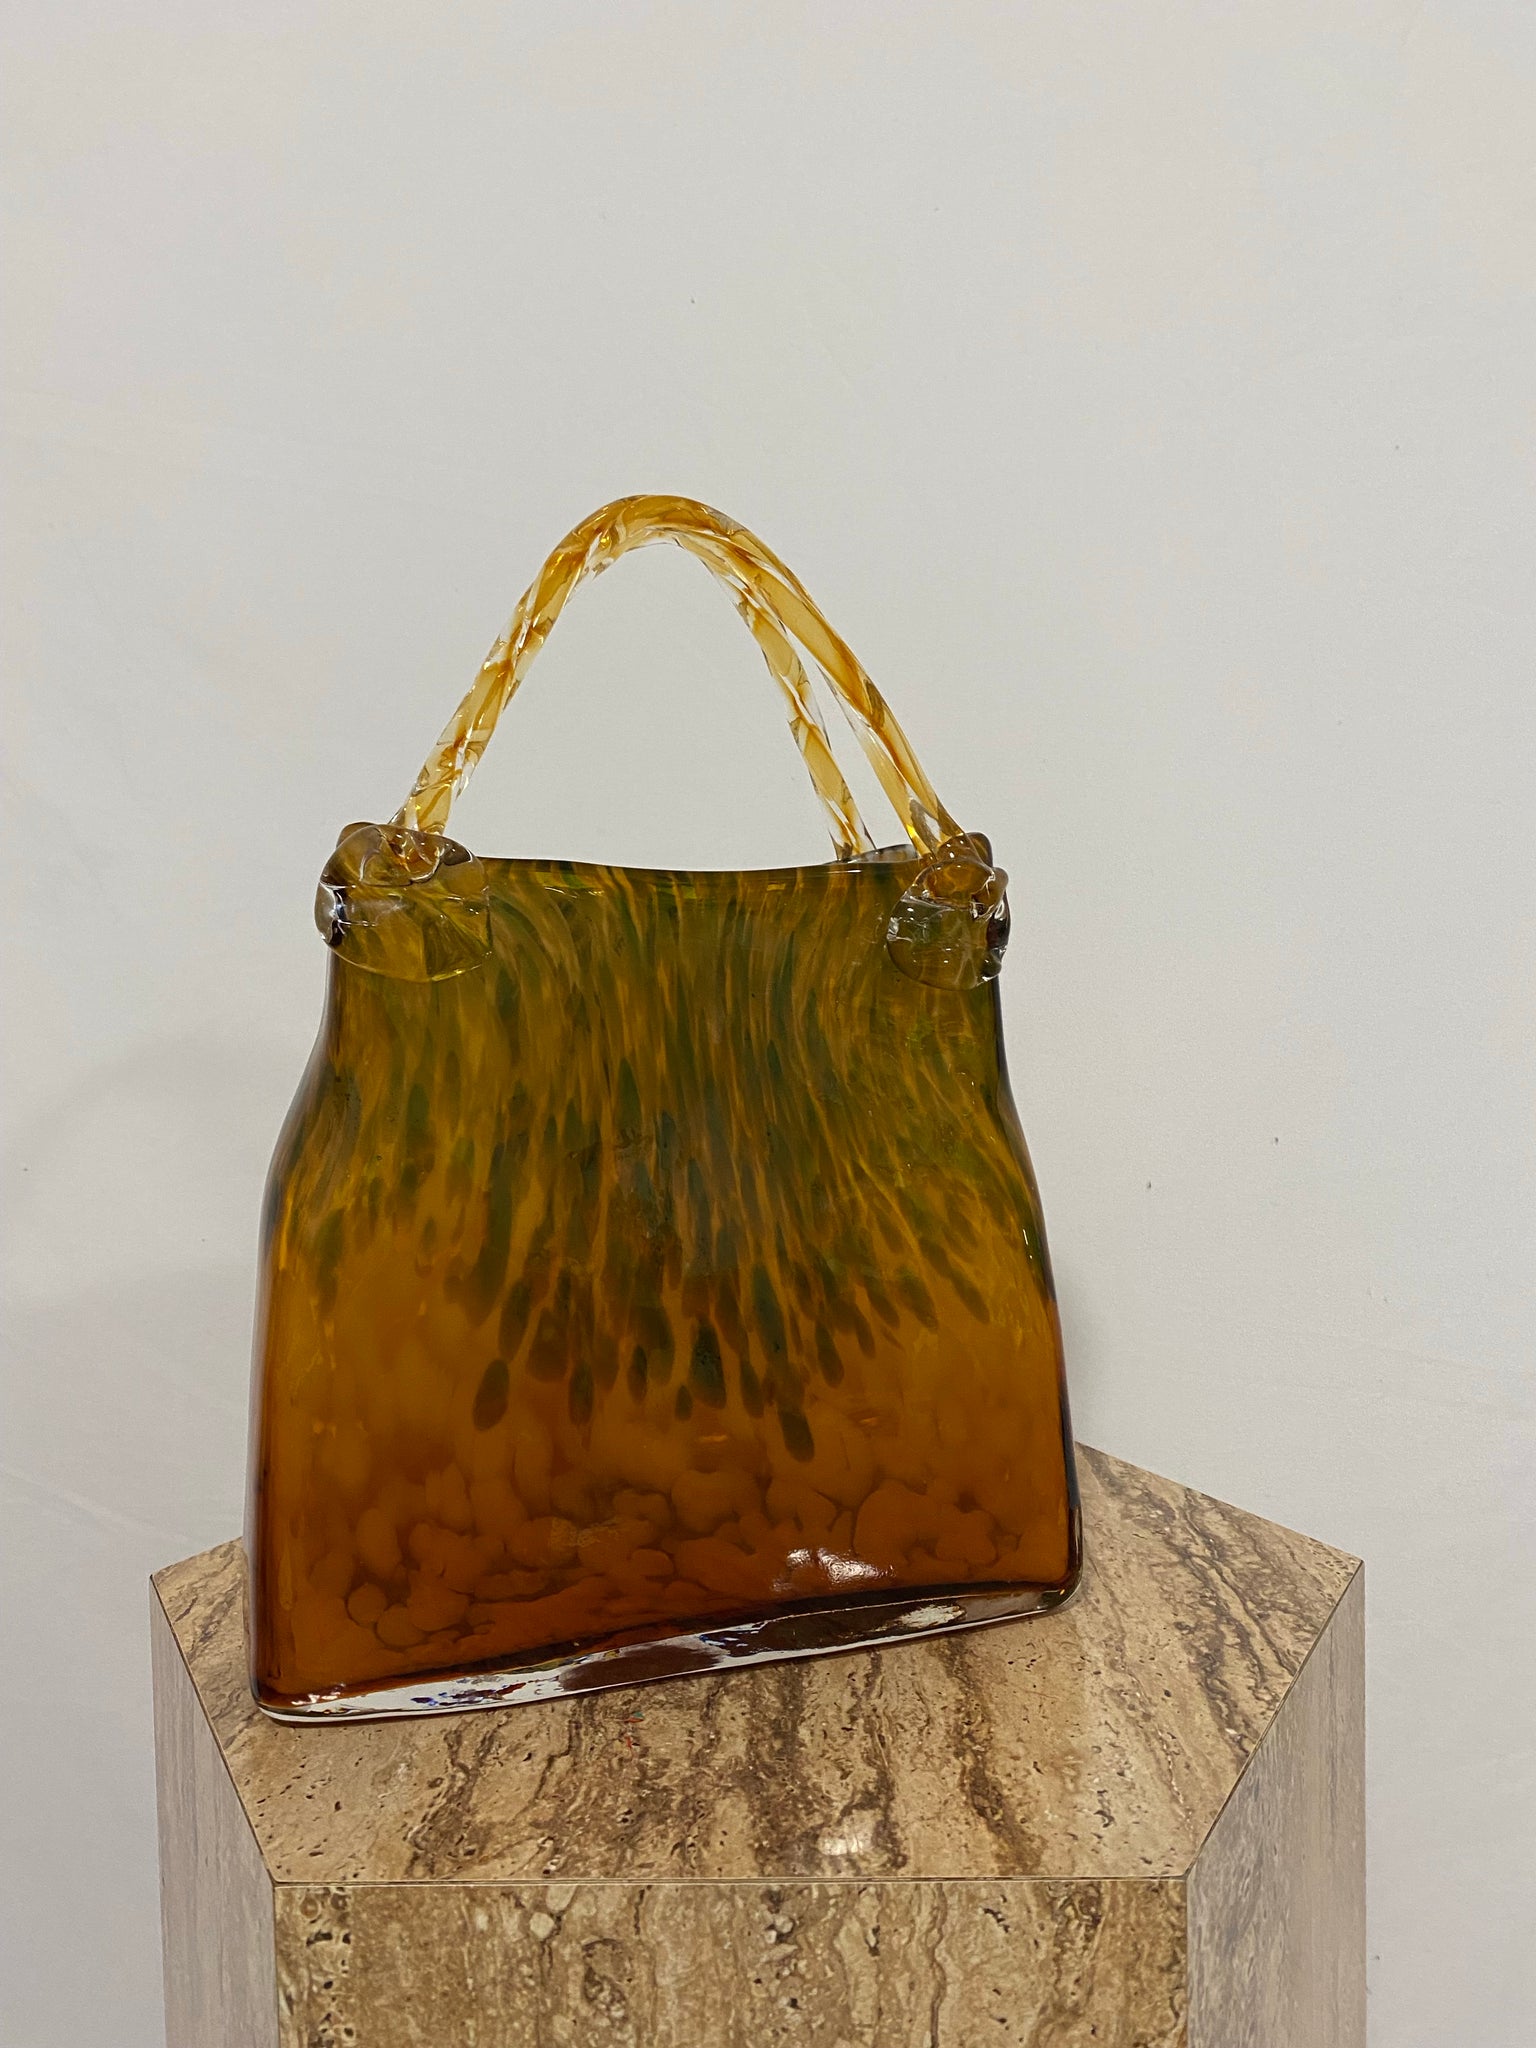 Thicc glass purse vase